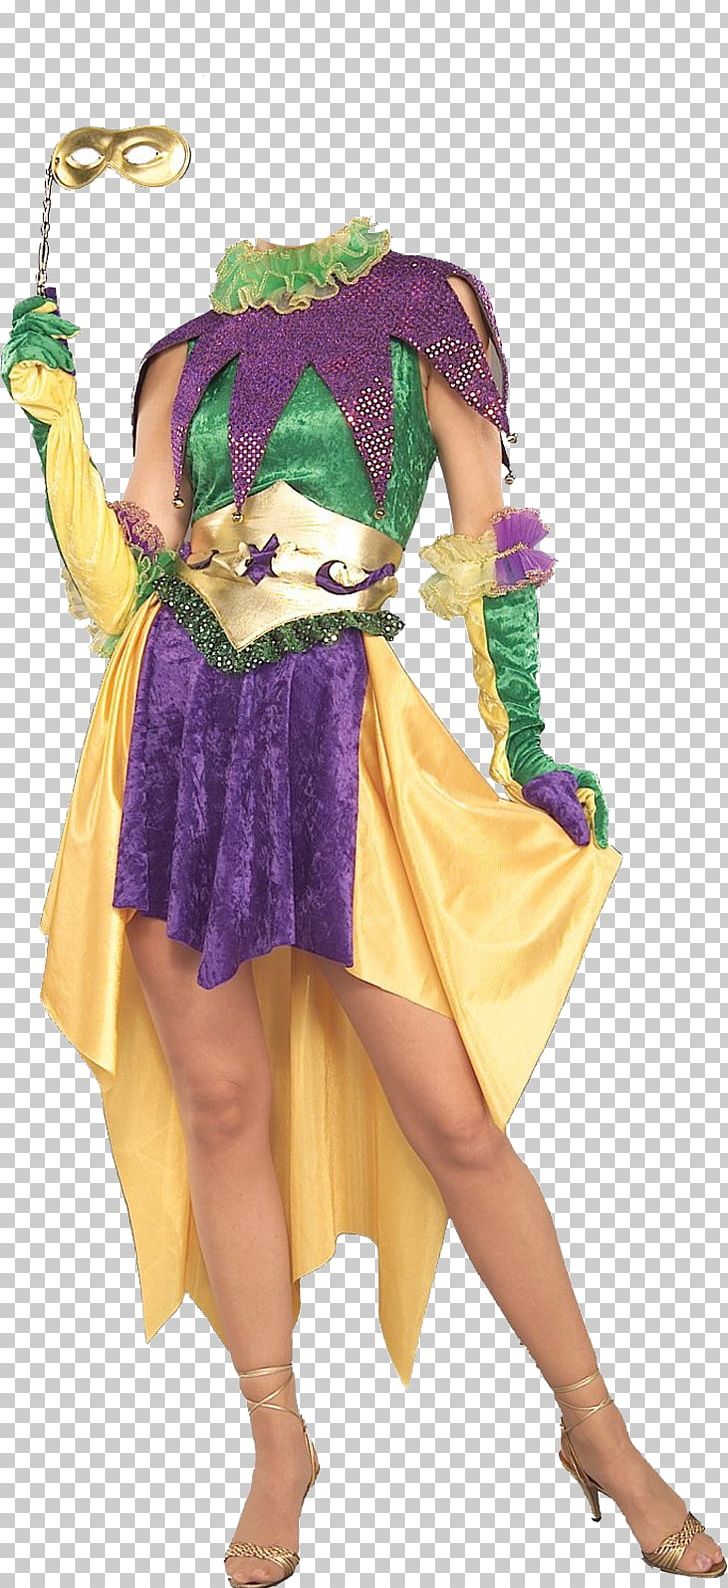 Mardi Gras In New Orleans Costume Party Dress PNG, Clipart, Clothing, Costume, Costume Design, Costume Party, Dress Free PNG Download